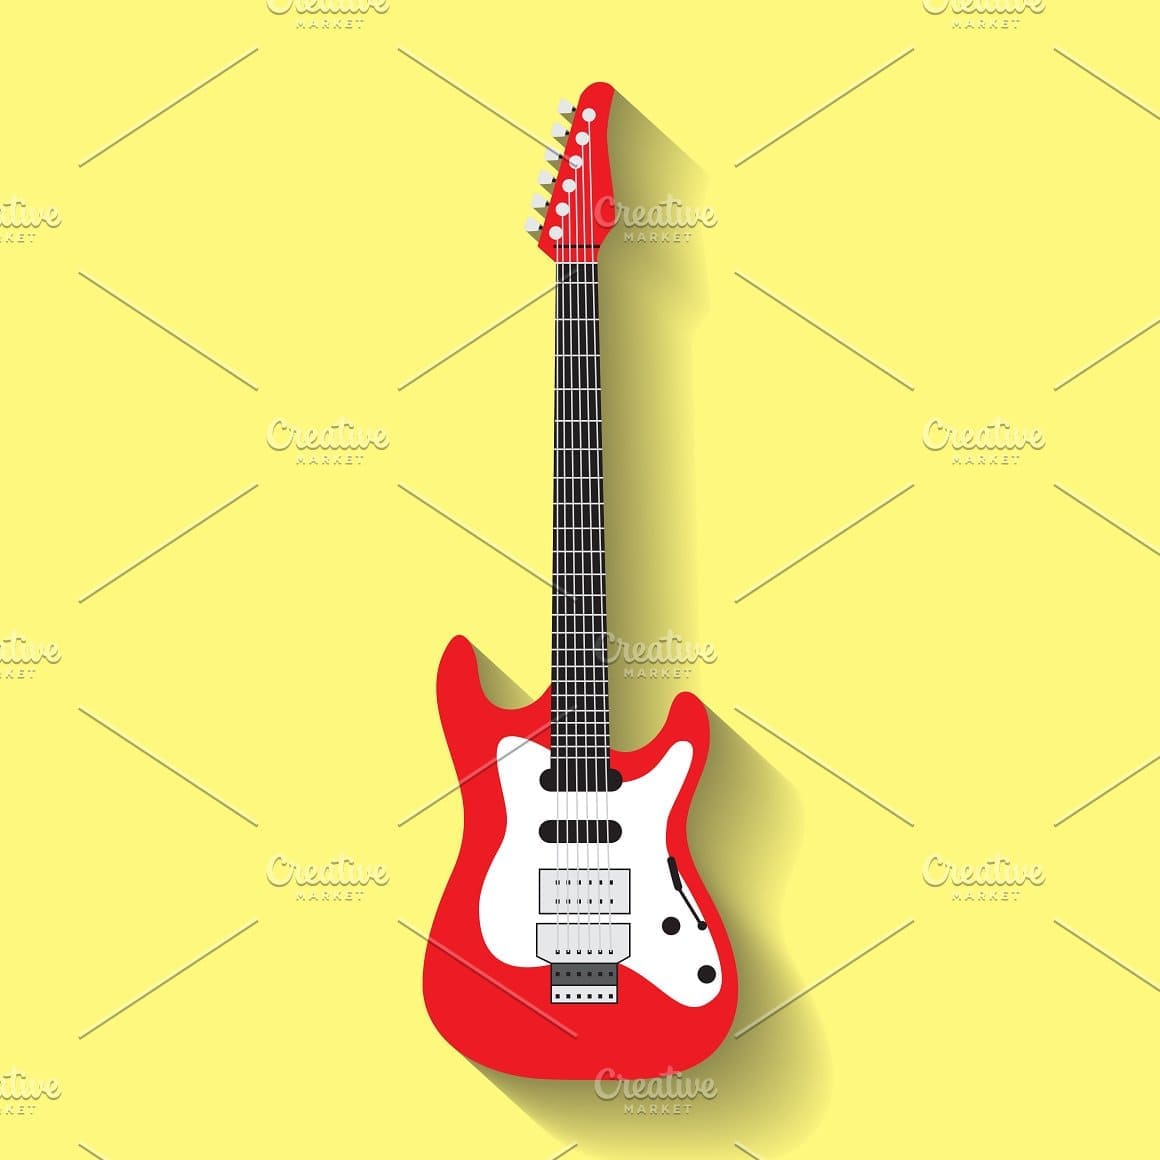 Red and white electric guitar on a yellow background.